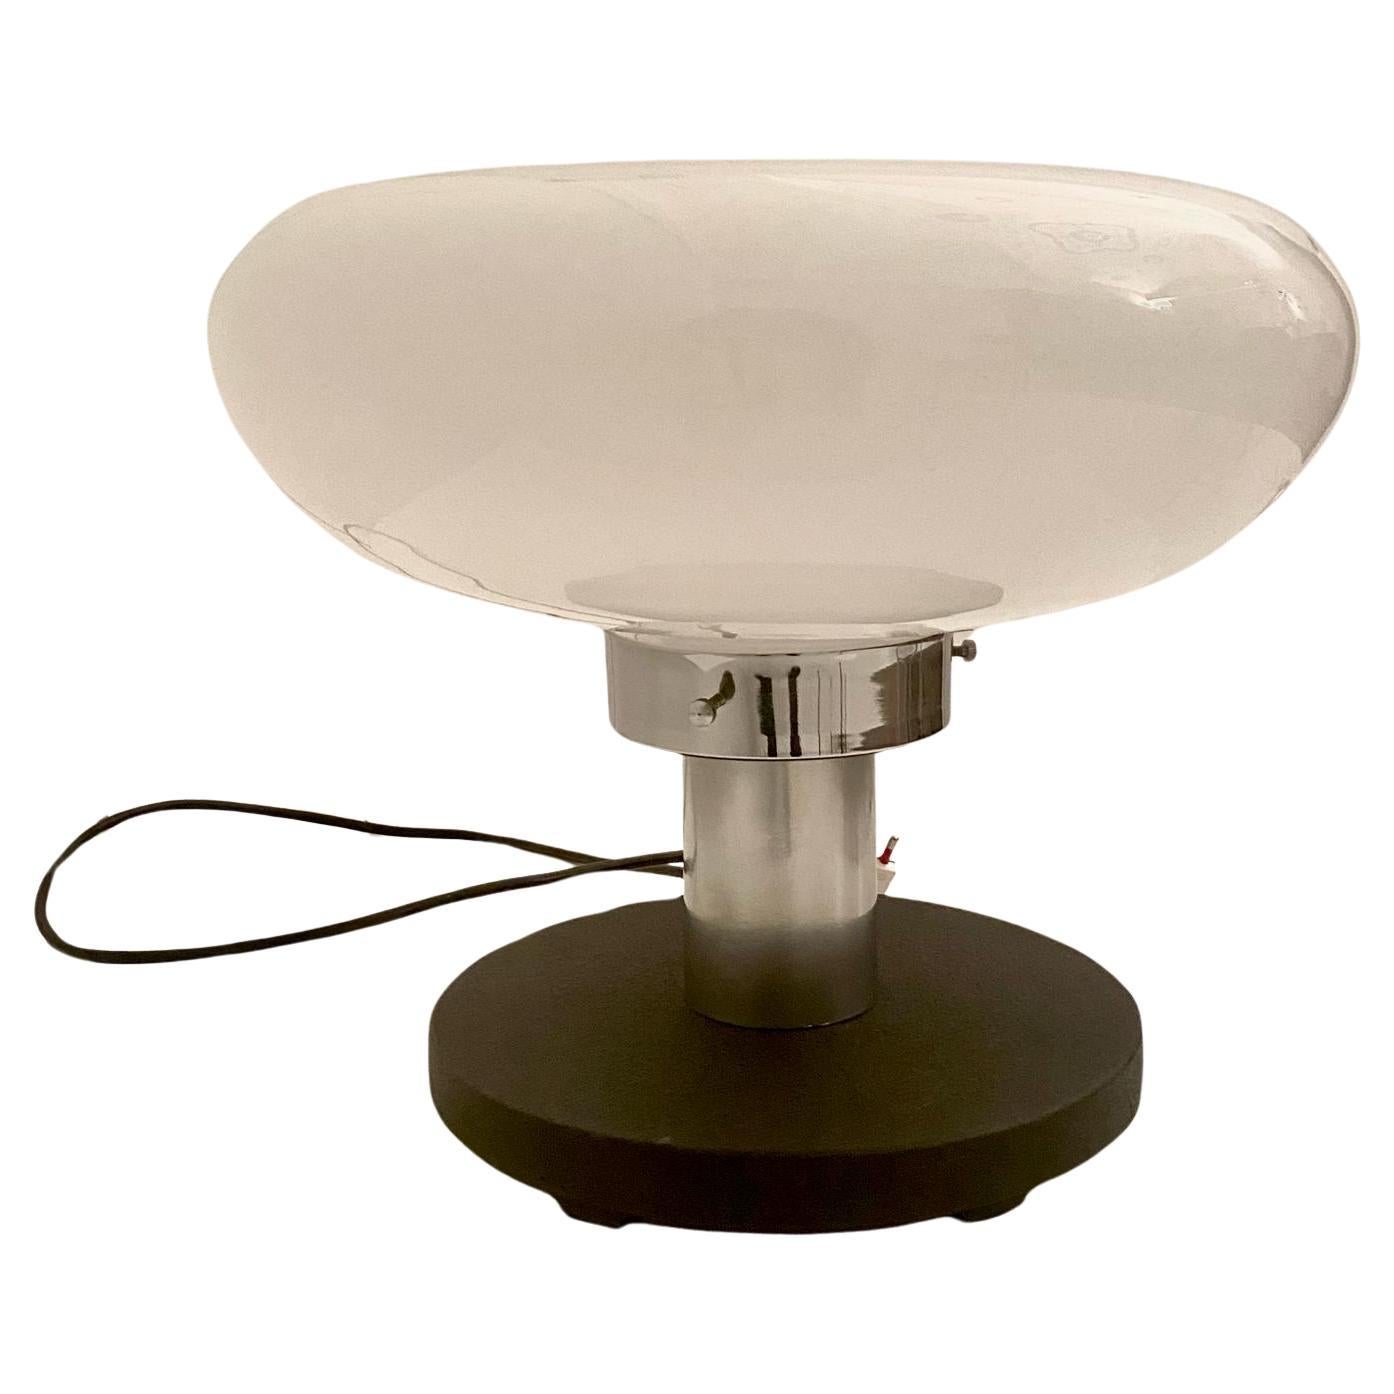 Big Space Age Murano Table Lamp in the style of Artemide, / Mangiarotti manufactured in Italy in the 1970 's

Transparent and white murano glass lampshade set on a round steel base. Special switcher made by a metal chromed lever. Chromed steel pole.